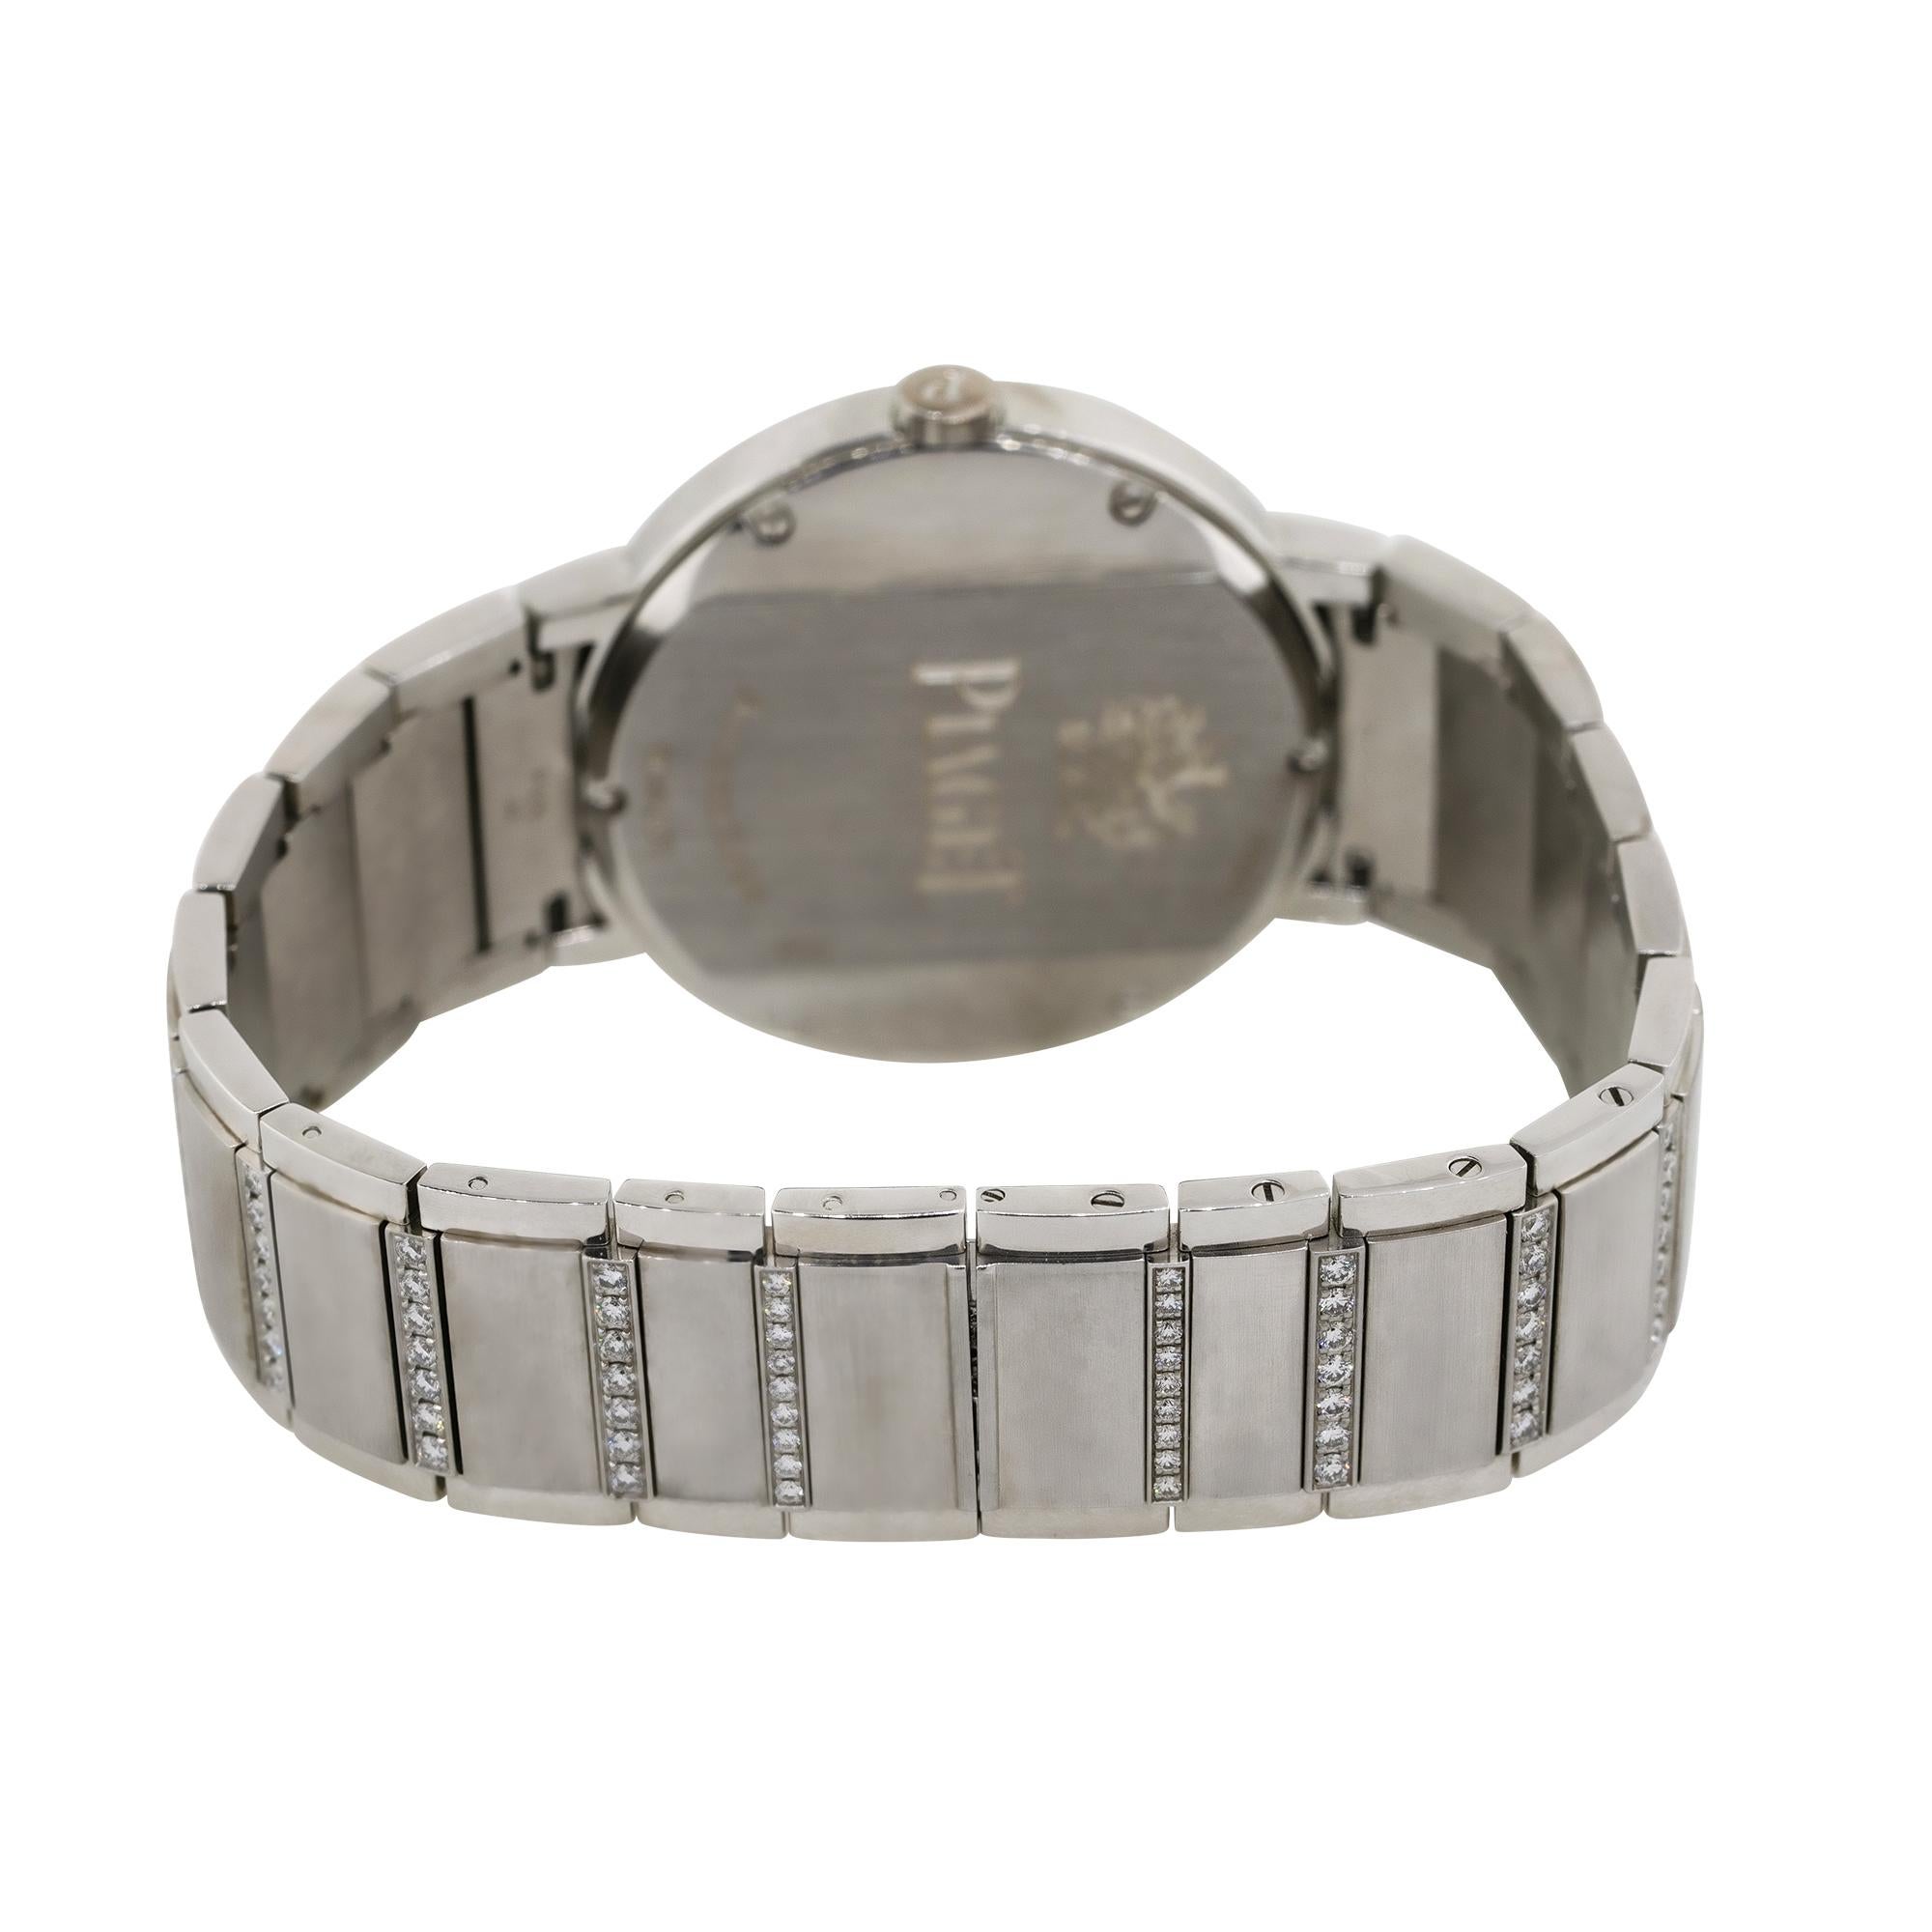 Piaget 18k White Gold Polo Diamond Watch In Excellent Condition For Sale In Boca Raton, FL